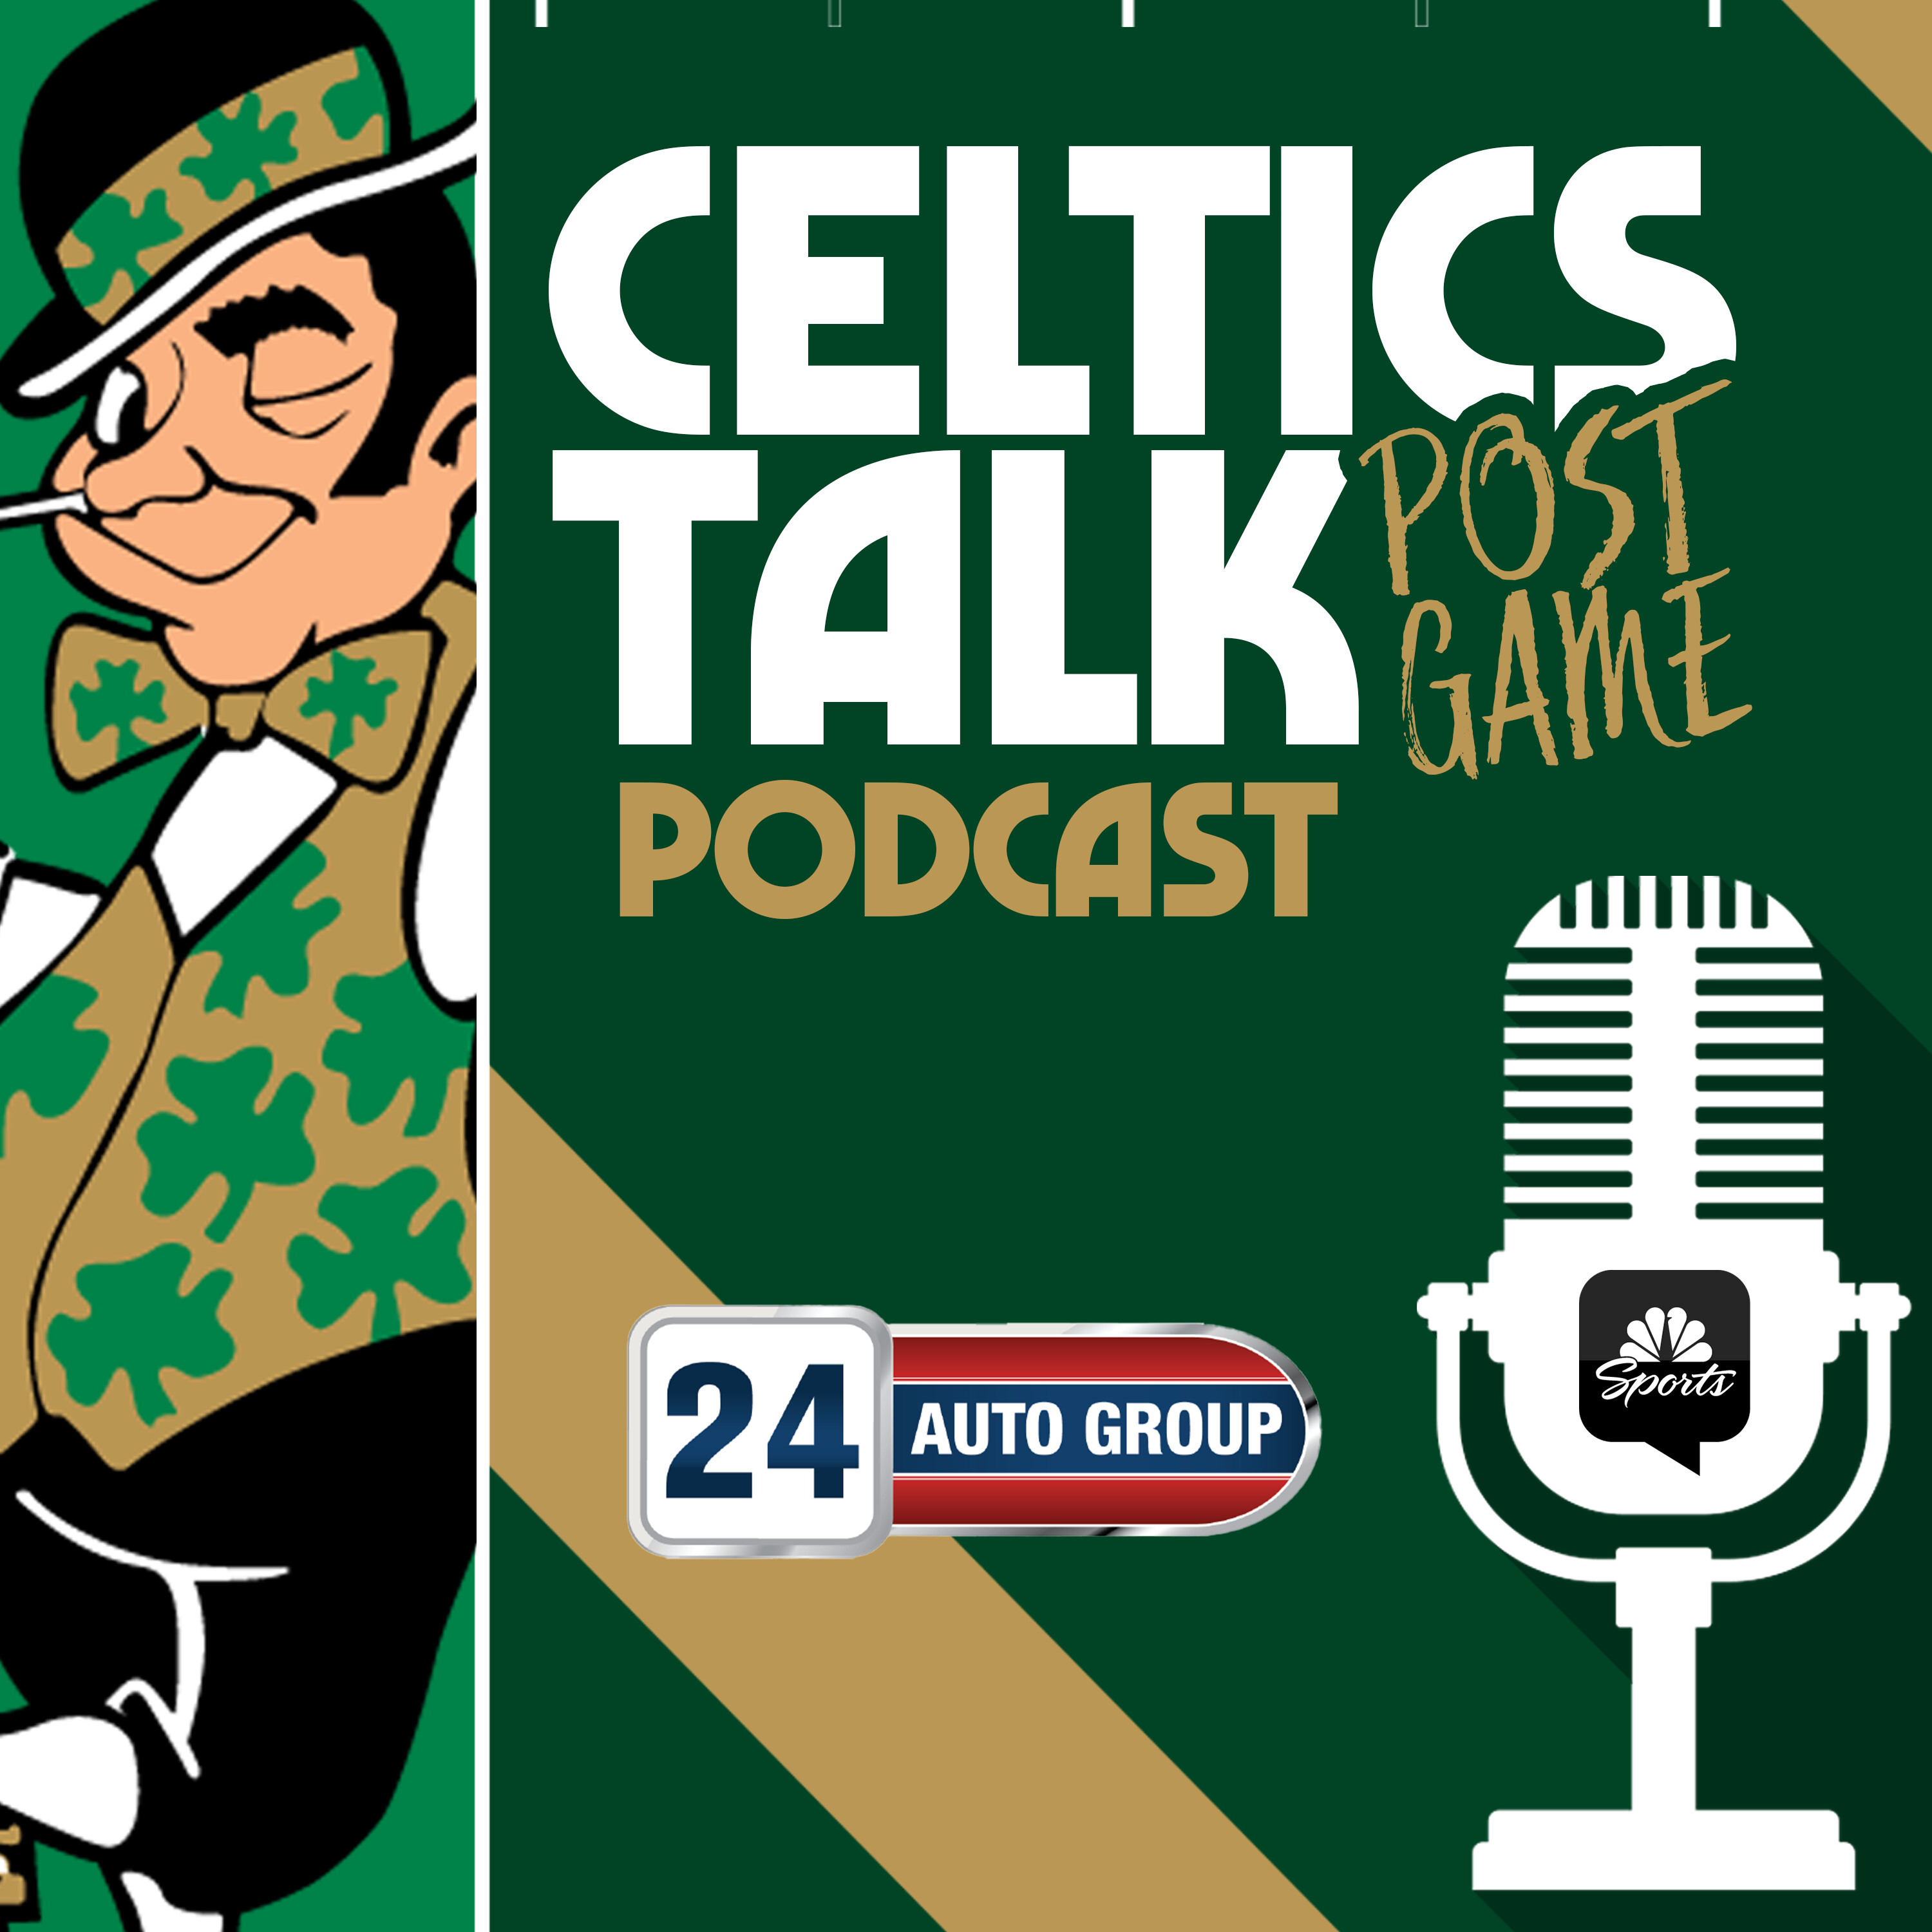 POSTGAME POD: Celtics become only 15th NBA team to force Game 6 when down 3-0